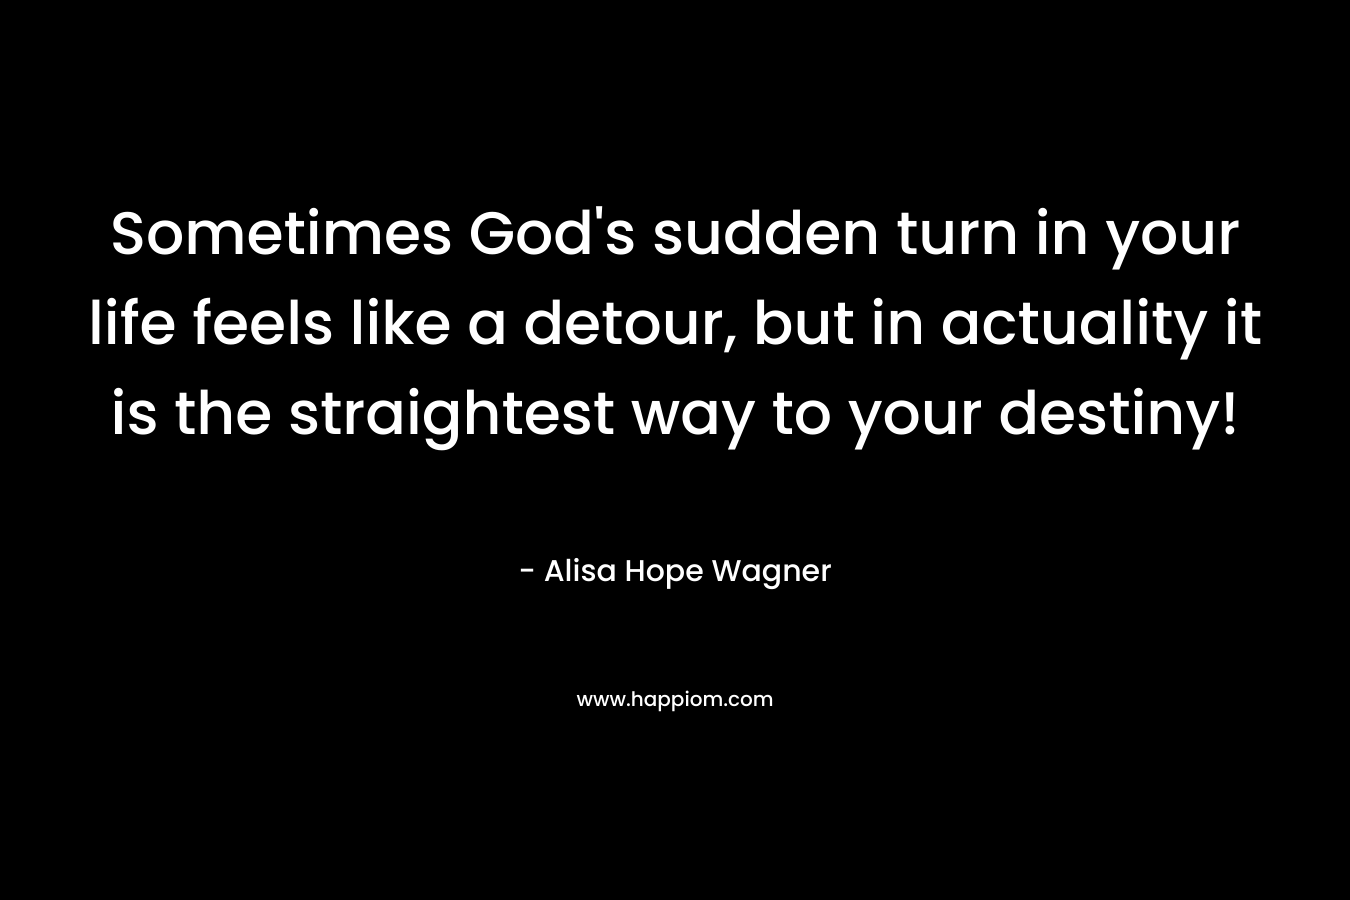 Sometimes God’s sudden turn in your life feels like a detour, but in actuality it is the straightest way to your destiny! – Alisa Hope Wagner